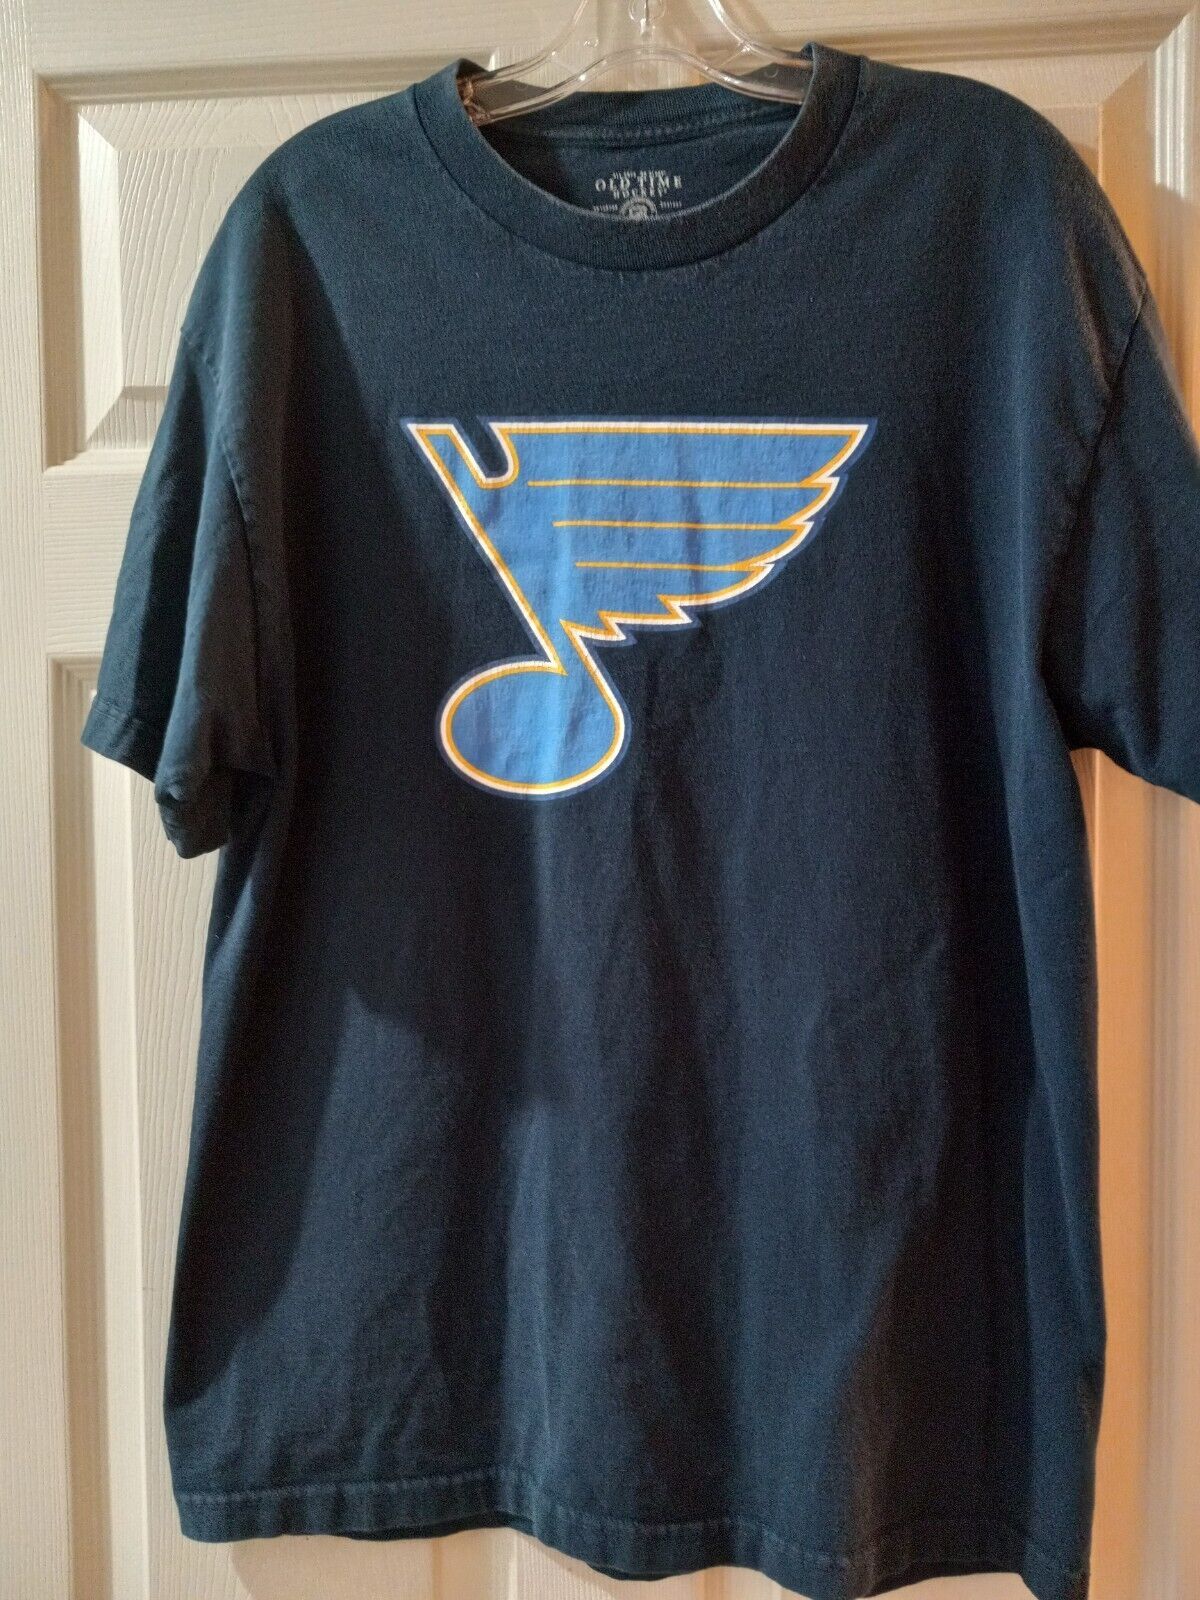 Primary image for St. Louis Blues NHL Hockey Adult T Shirt Size Large